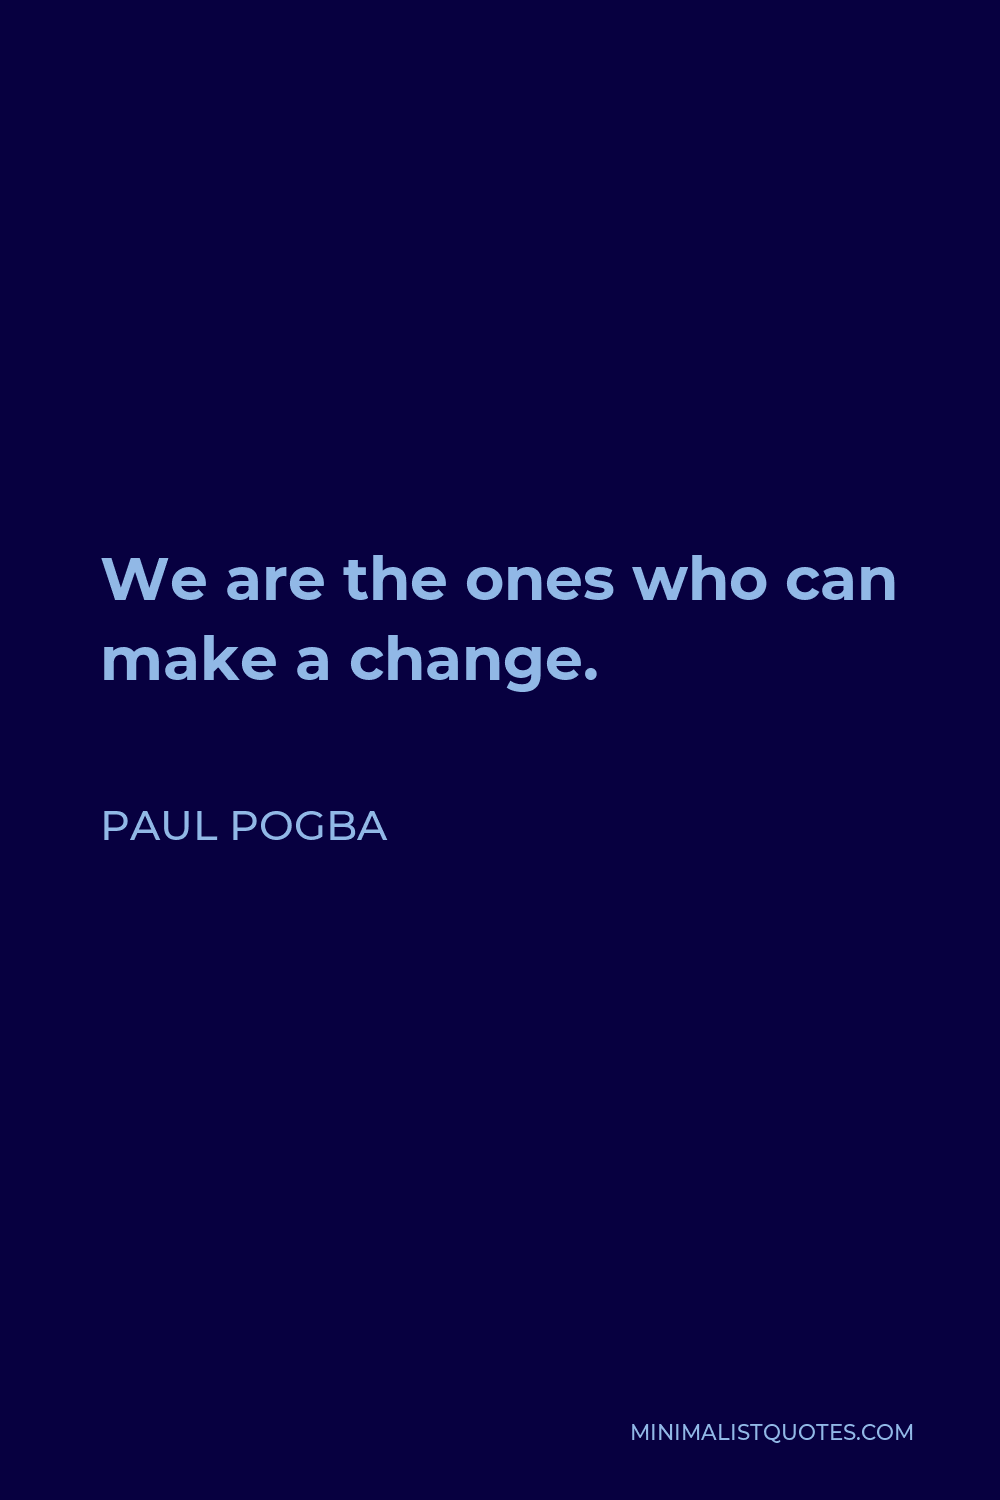 Paul Pogba Quote - We are the ones who can make a change.